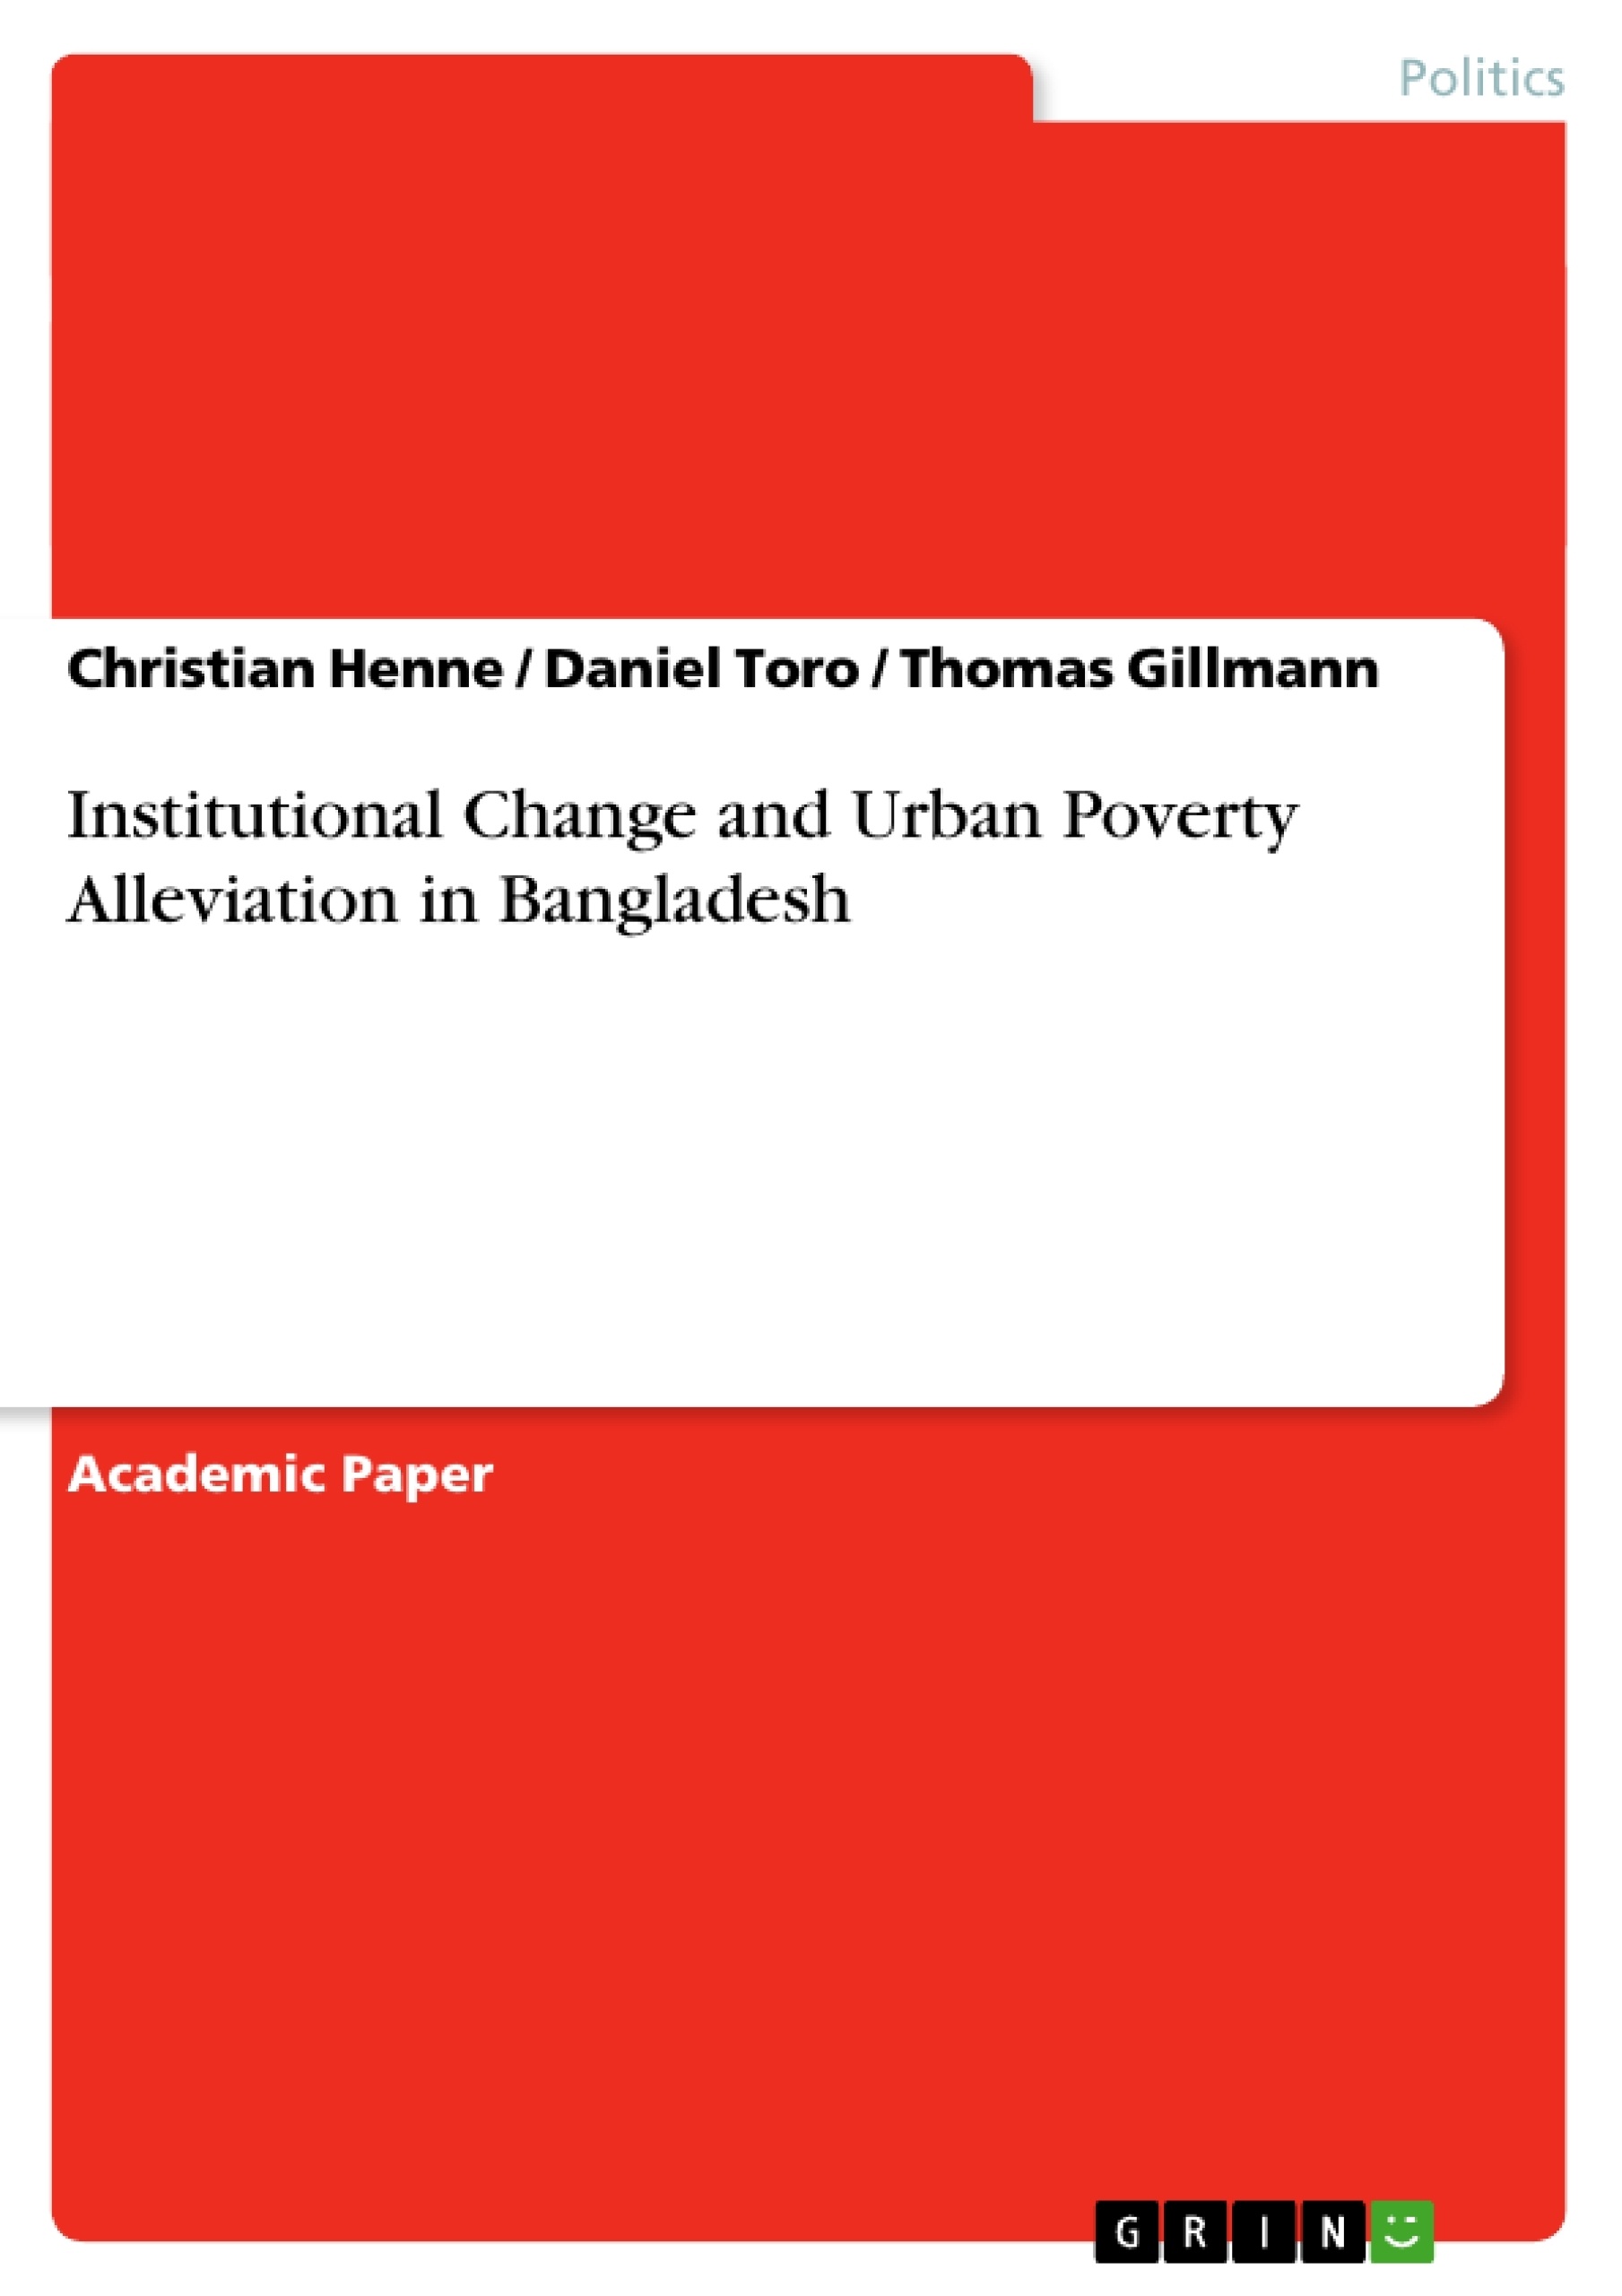 Title: Institutional Change and Urban Poverty Alleviation in Bangladesh